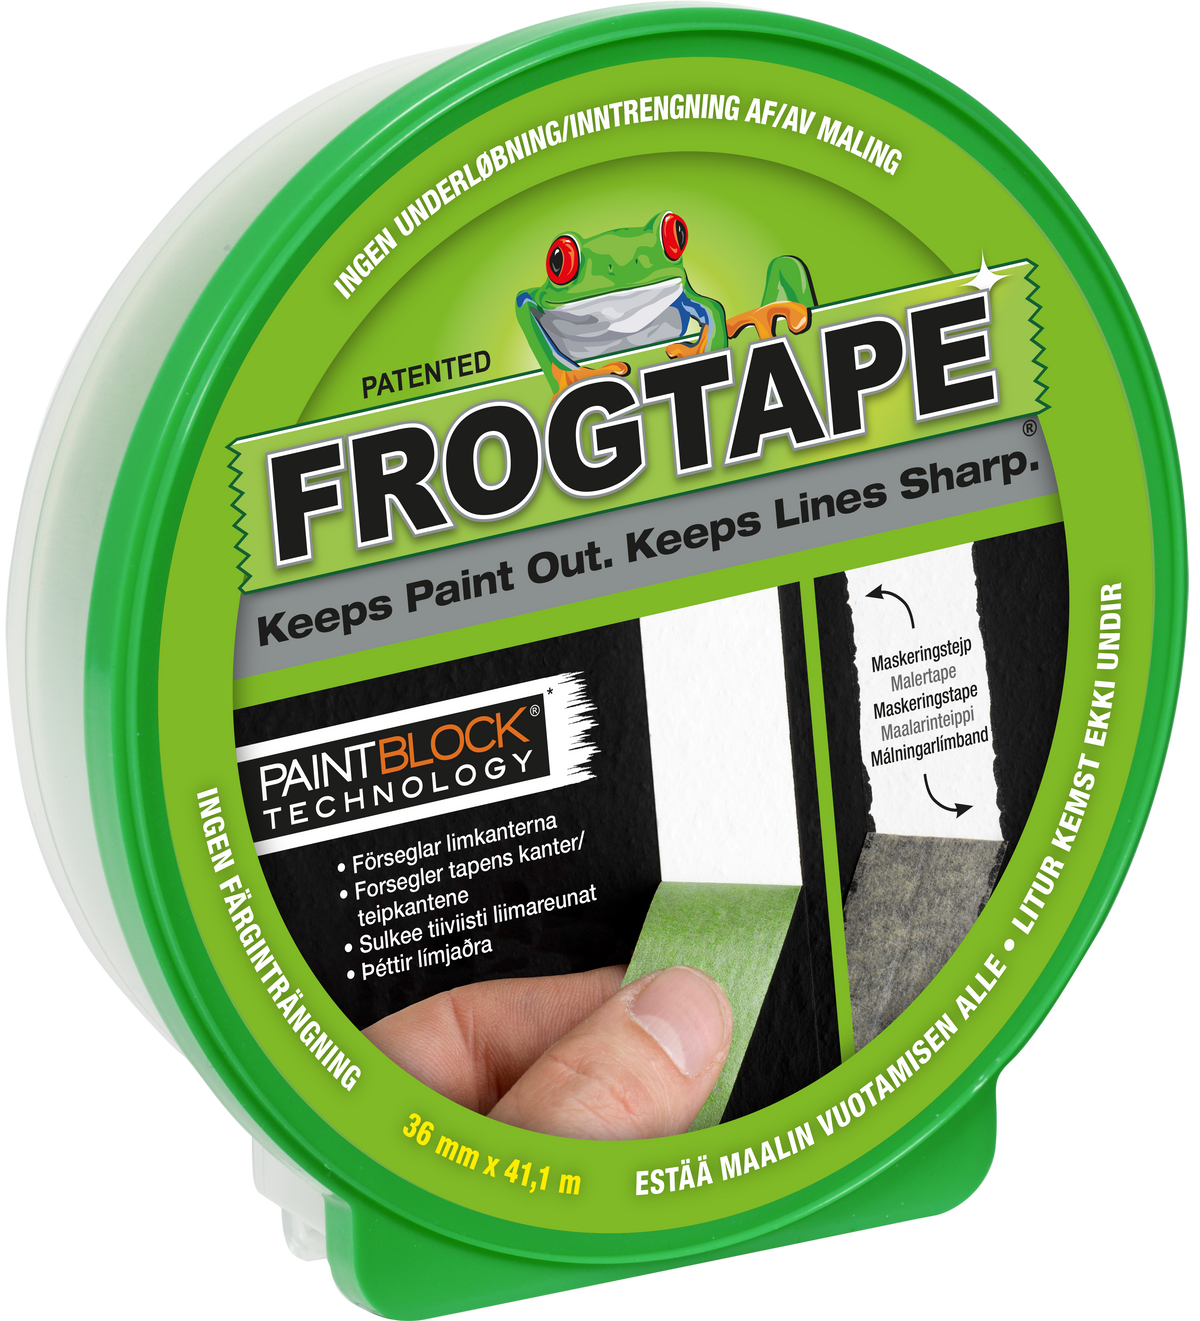 FROGTAPE® Multi Surface